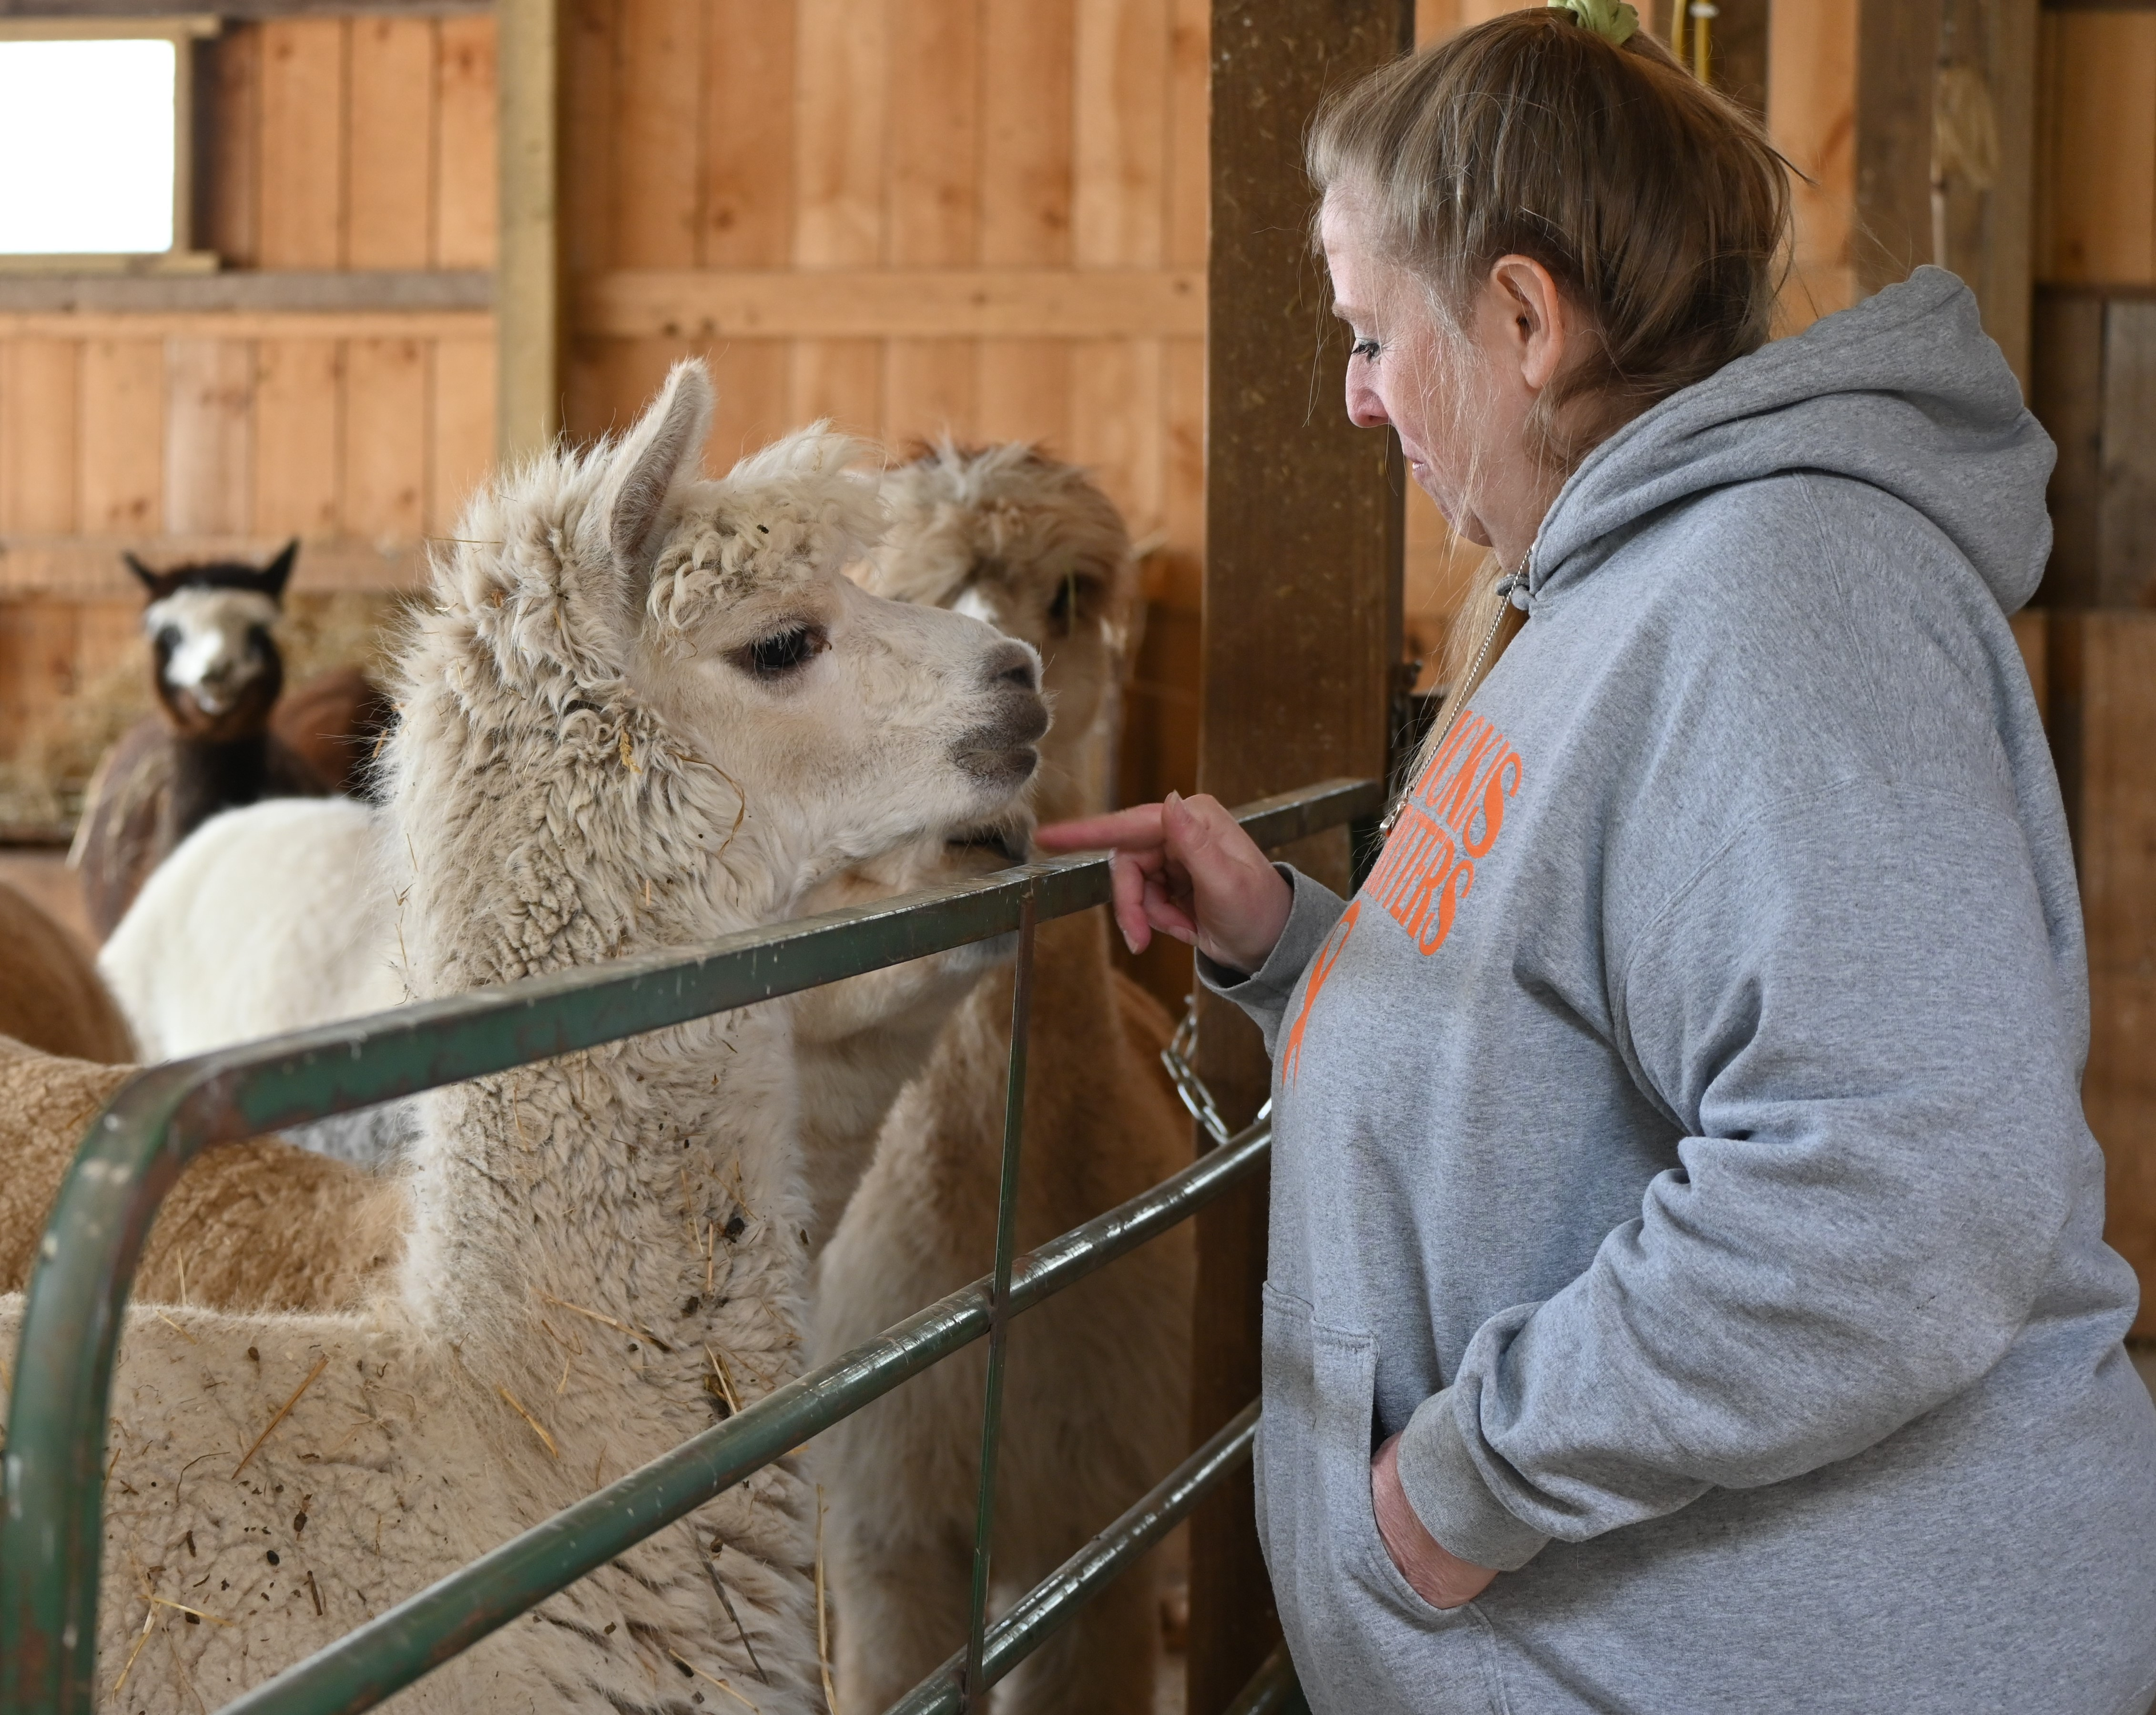 Farmer Of The Month Uses Alpacas As A Therapy Tool